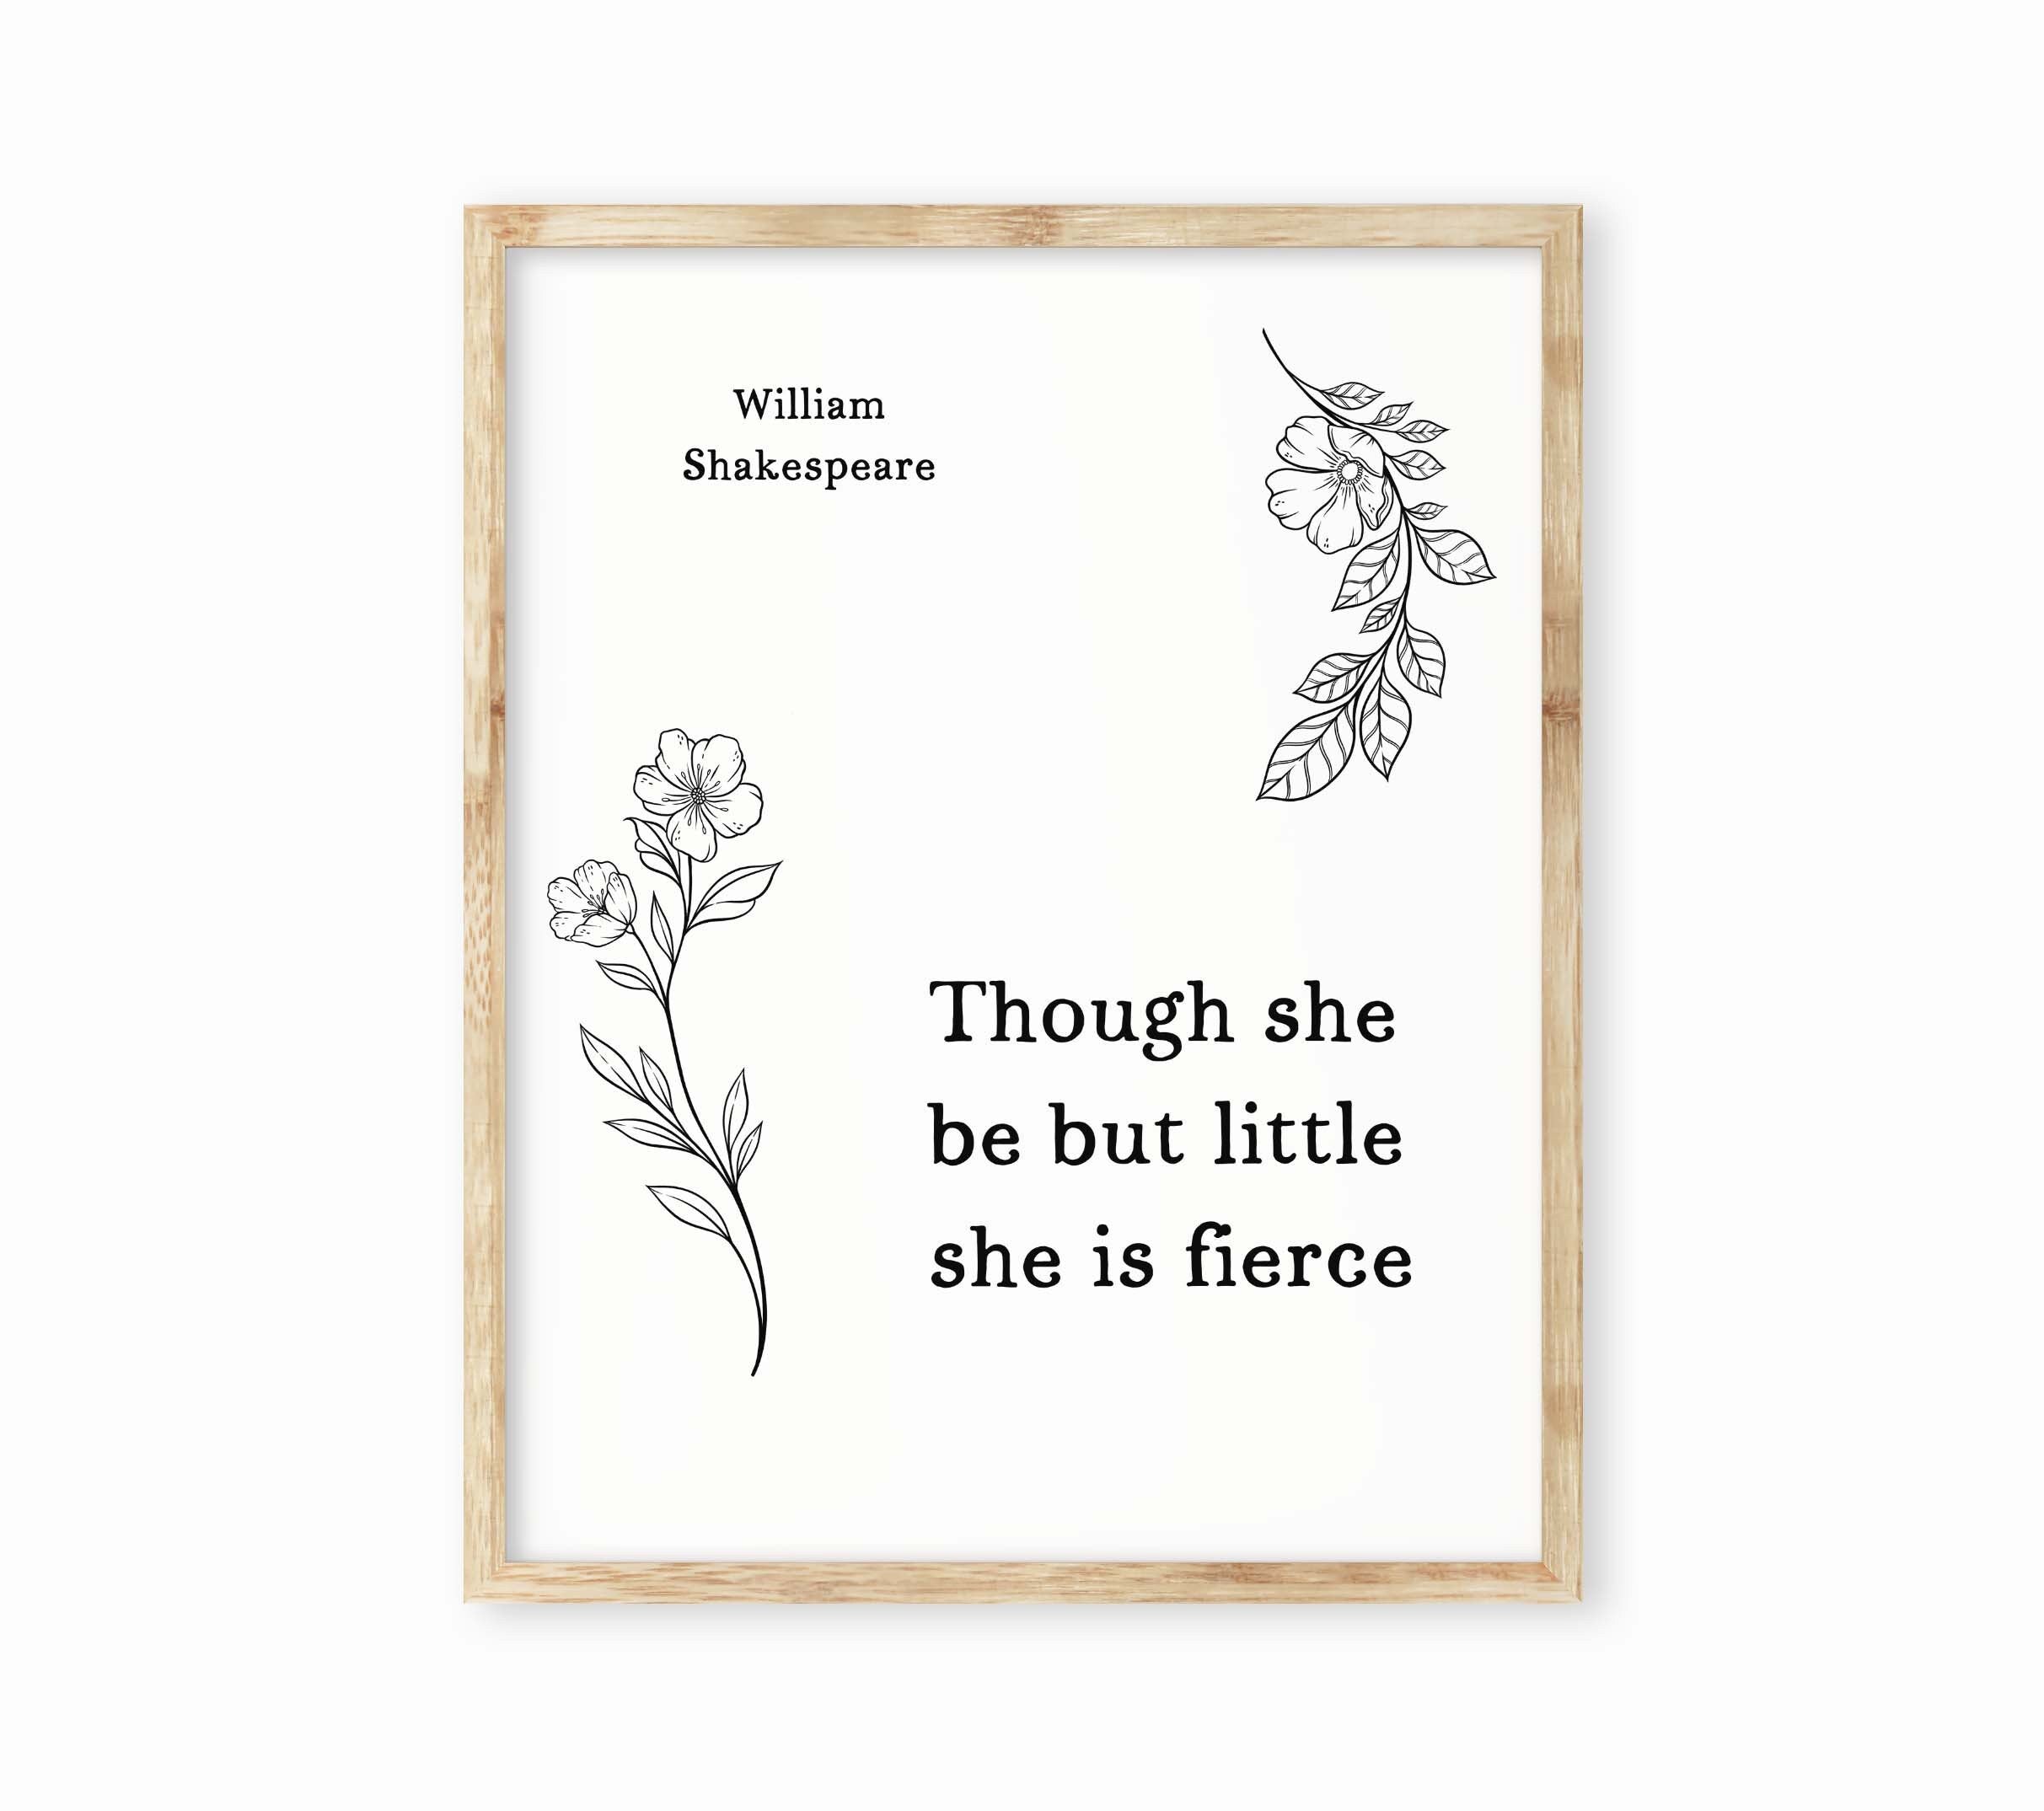 Though She Be But Little She Is Fierce Wall Art Prints, William Shakespeare Quote Black & White Art Unframed